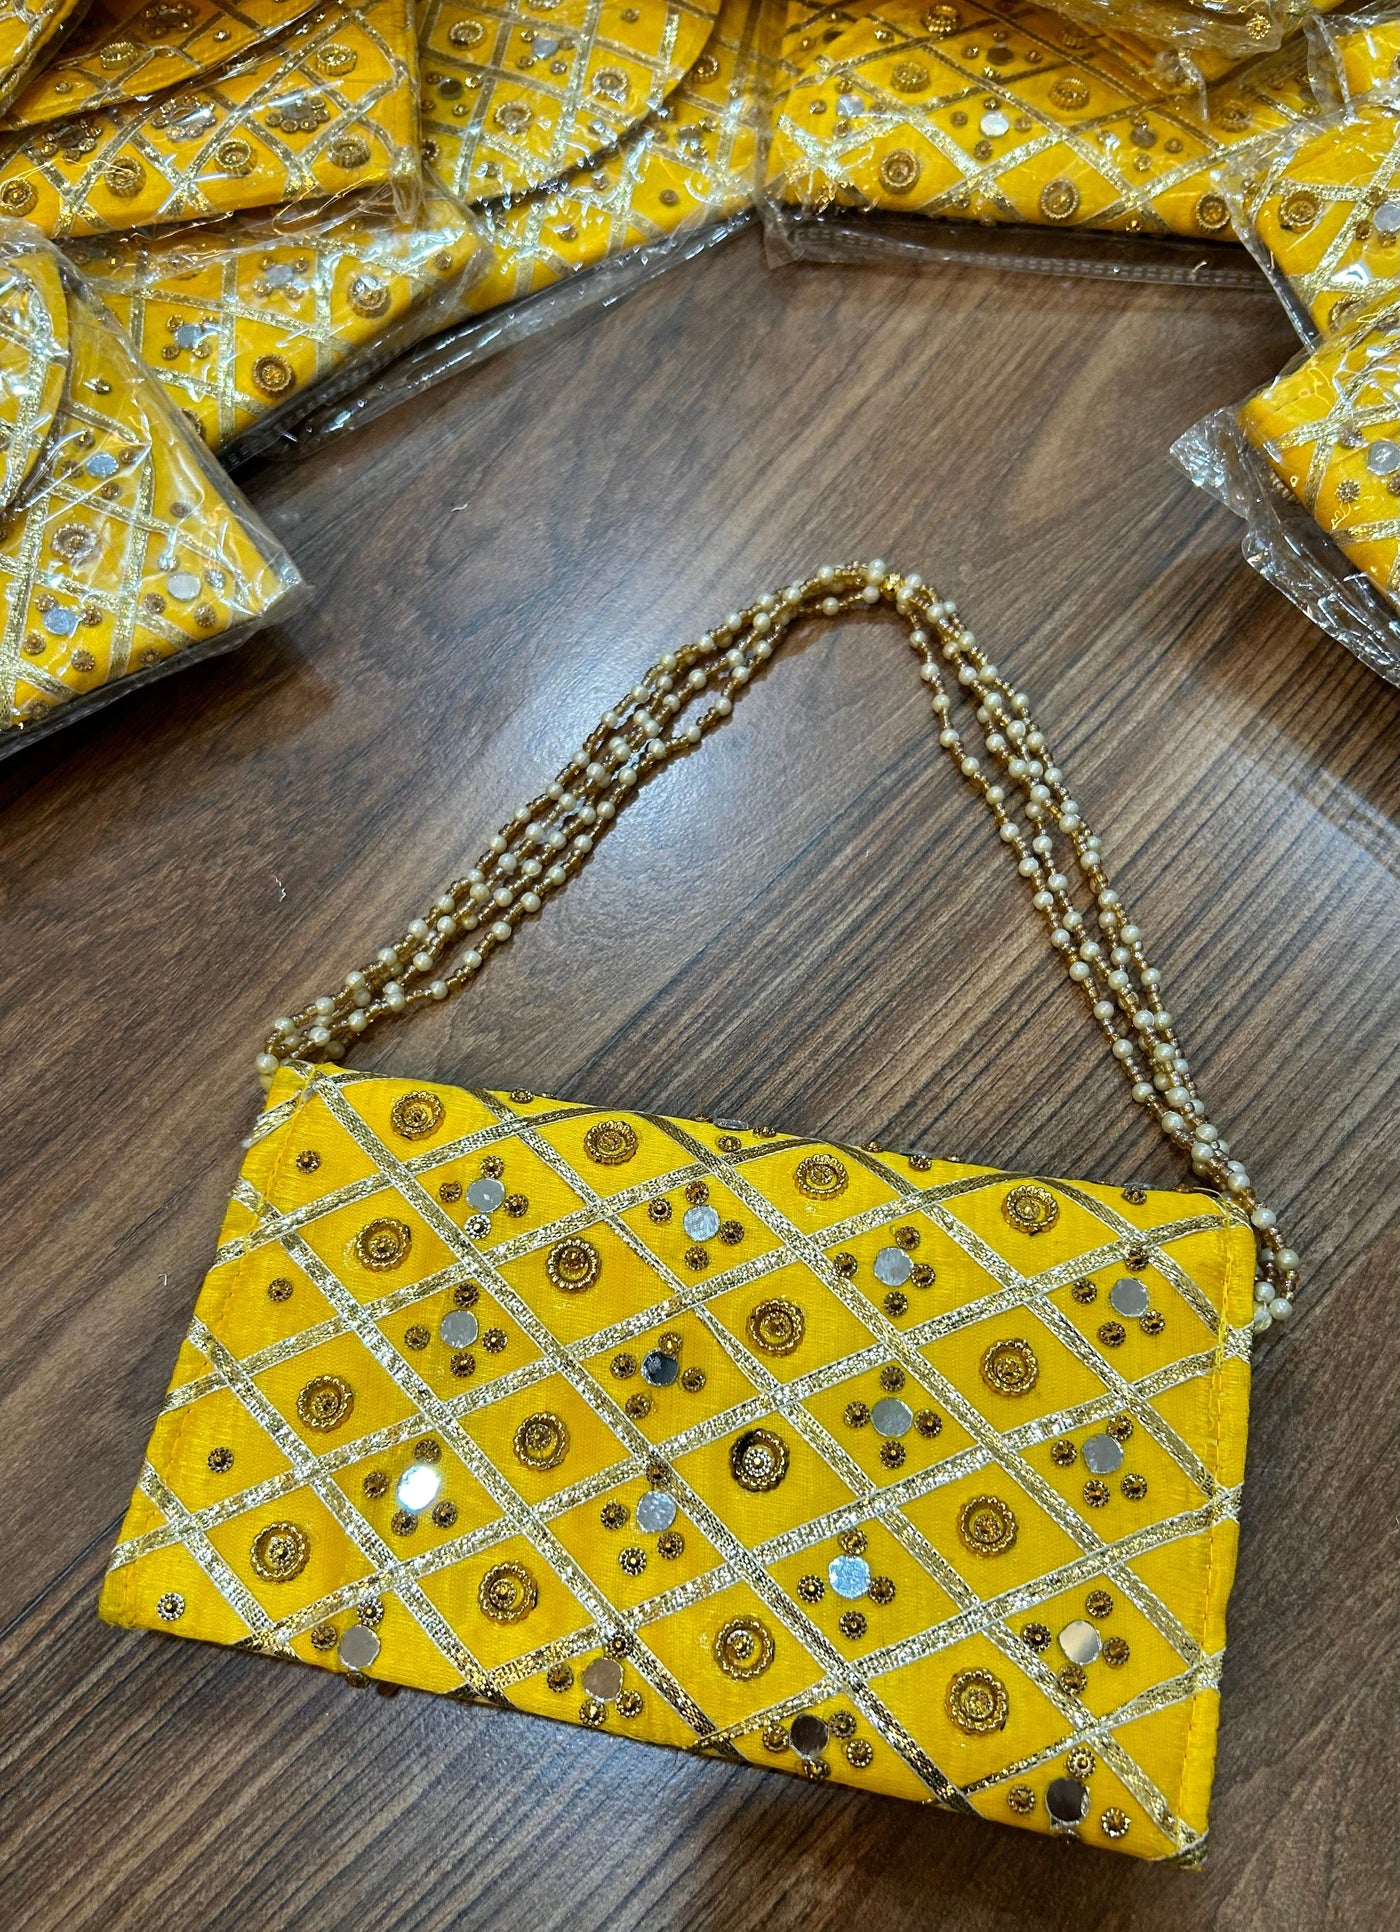 90 Rs each bracelet on buying 50+ pcs / WhatsApp at 8619550223 to order 🏷️ Clutch LAMANSH yellow 💛 color designer mirror work clutches envelopes for bridesmaids and wedding favours